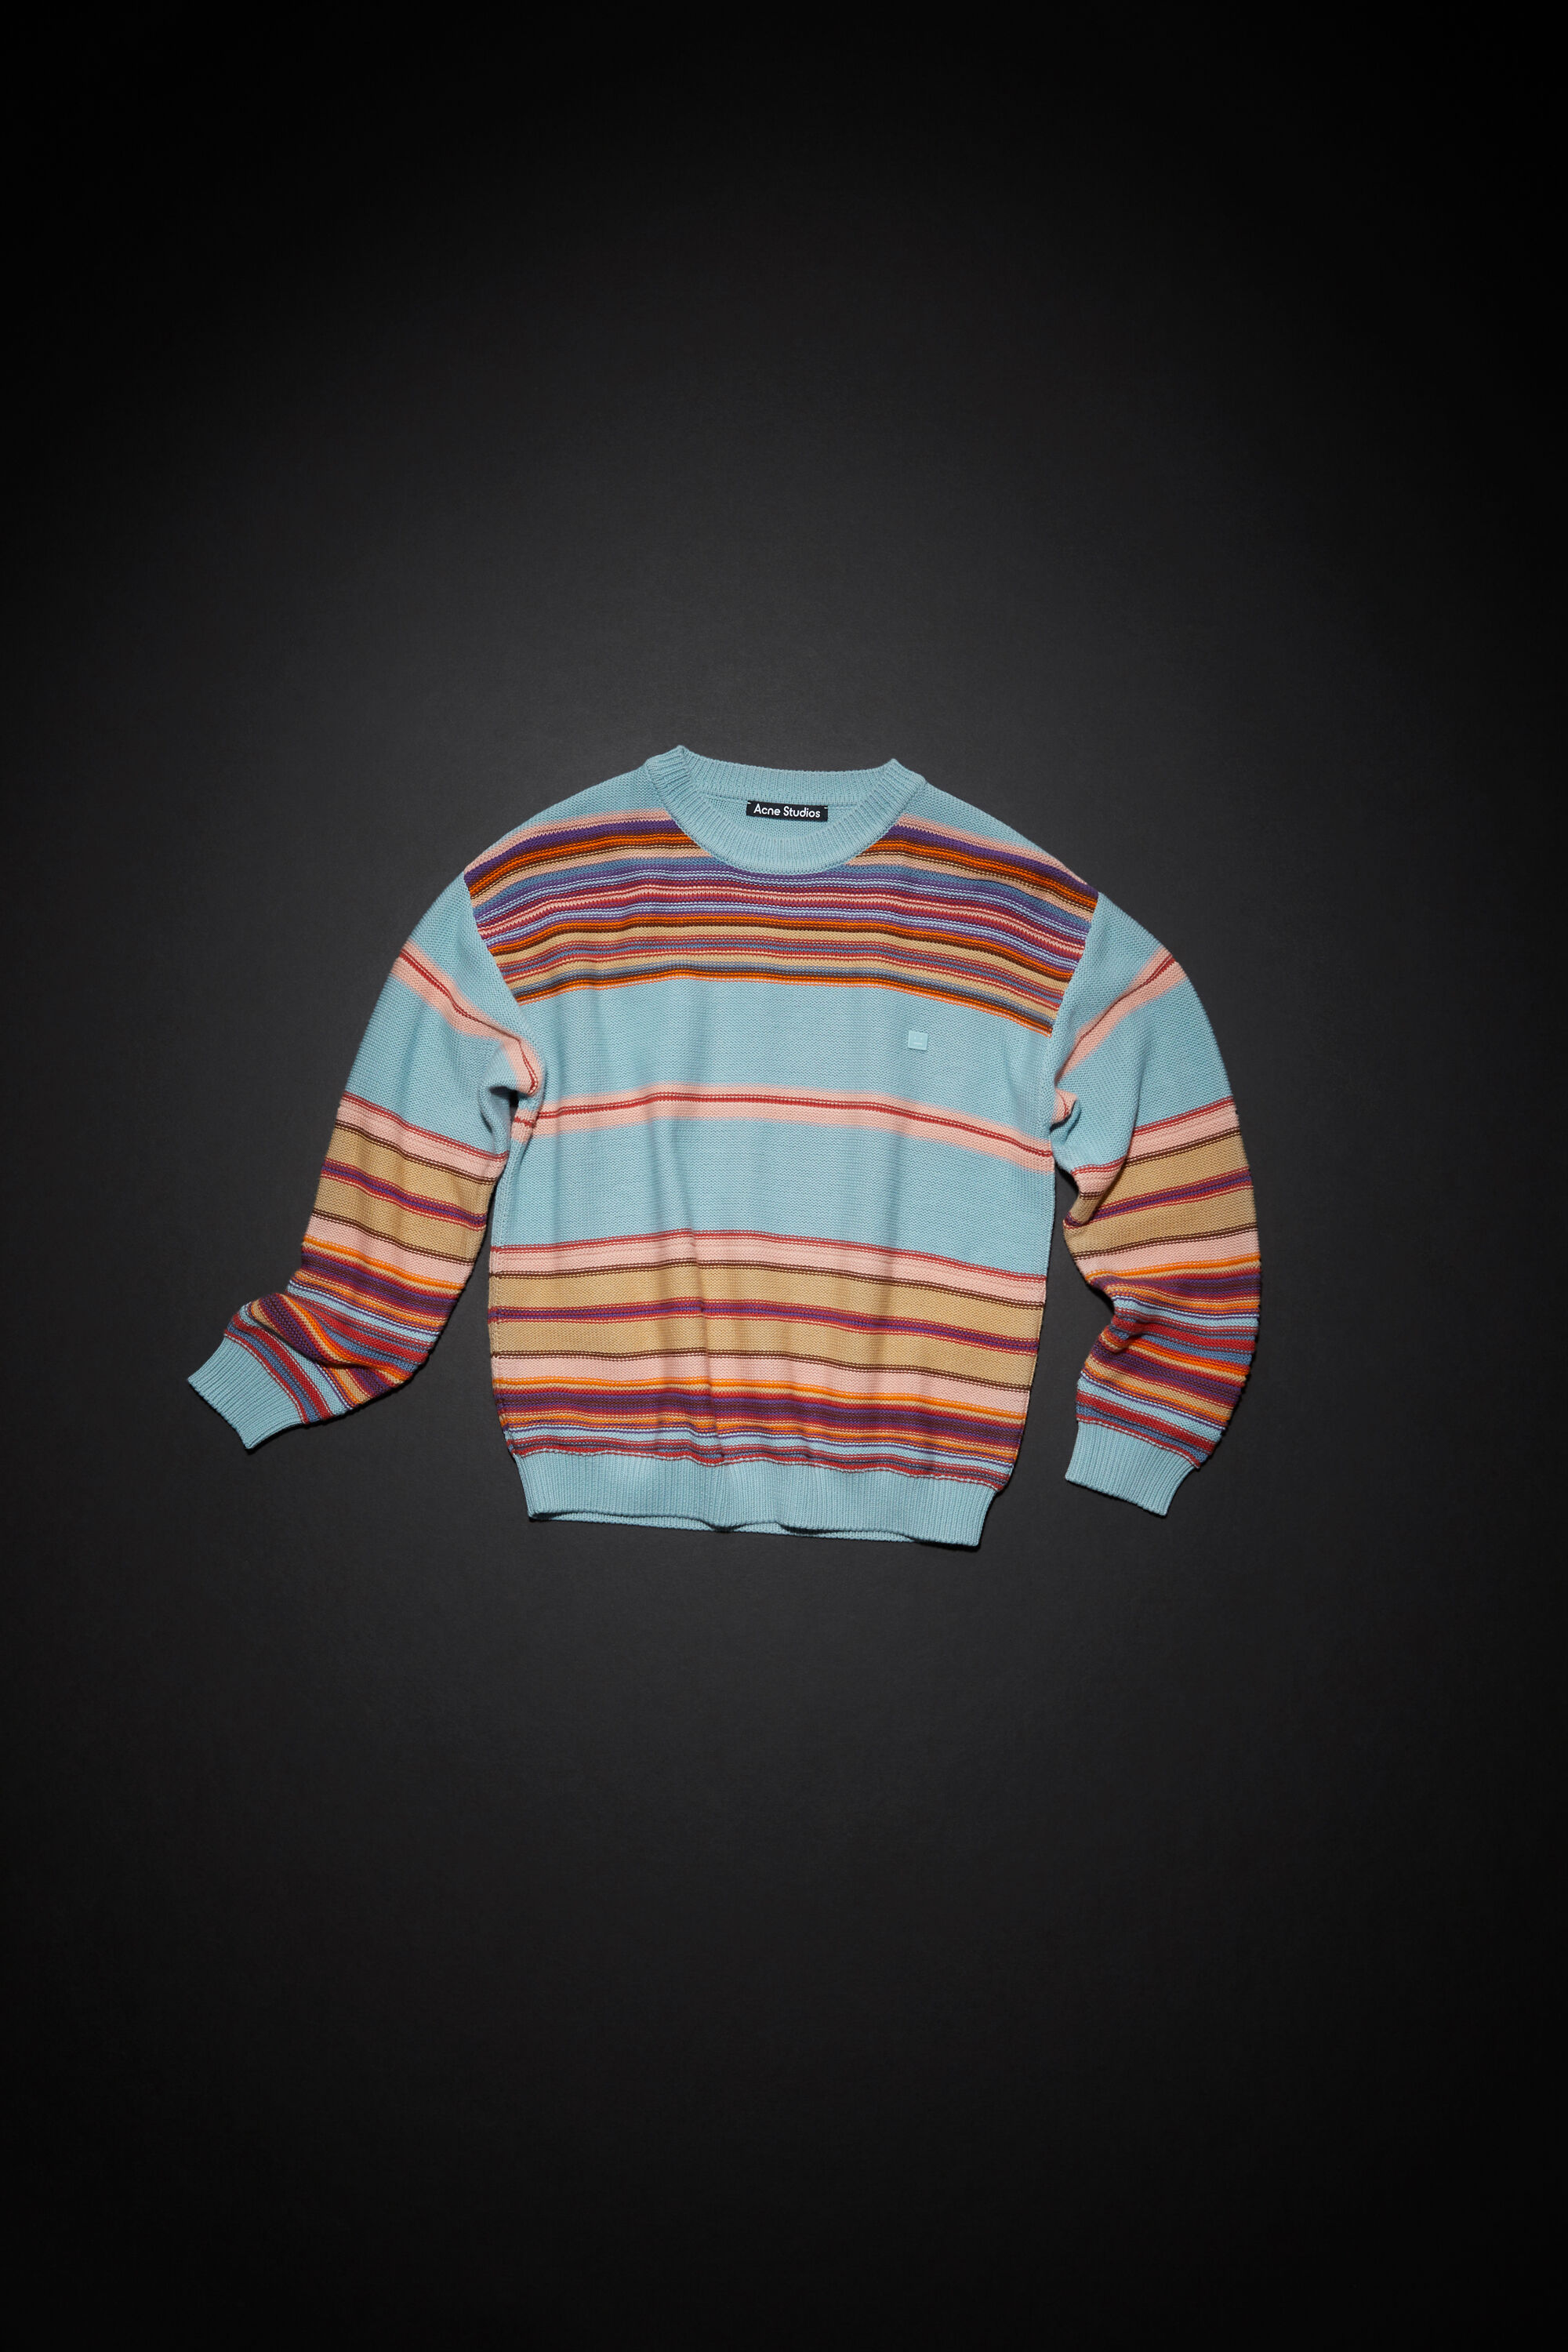 Acne Studios – Children's collection - Children's Clothing and